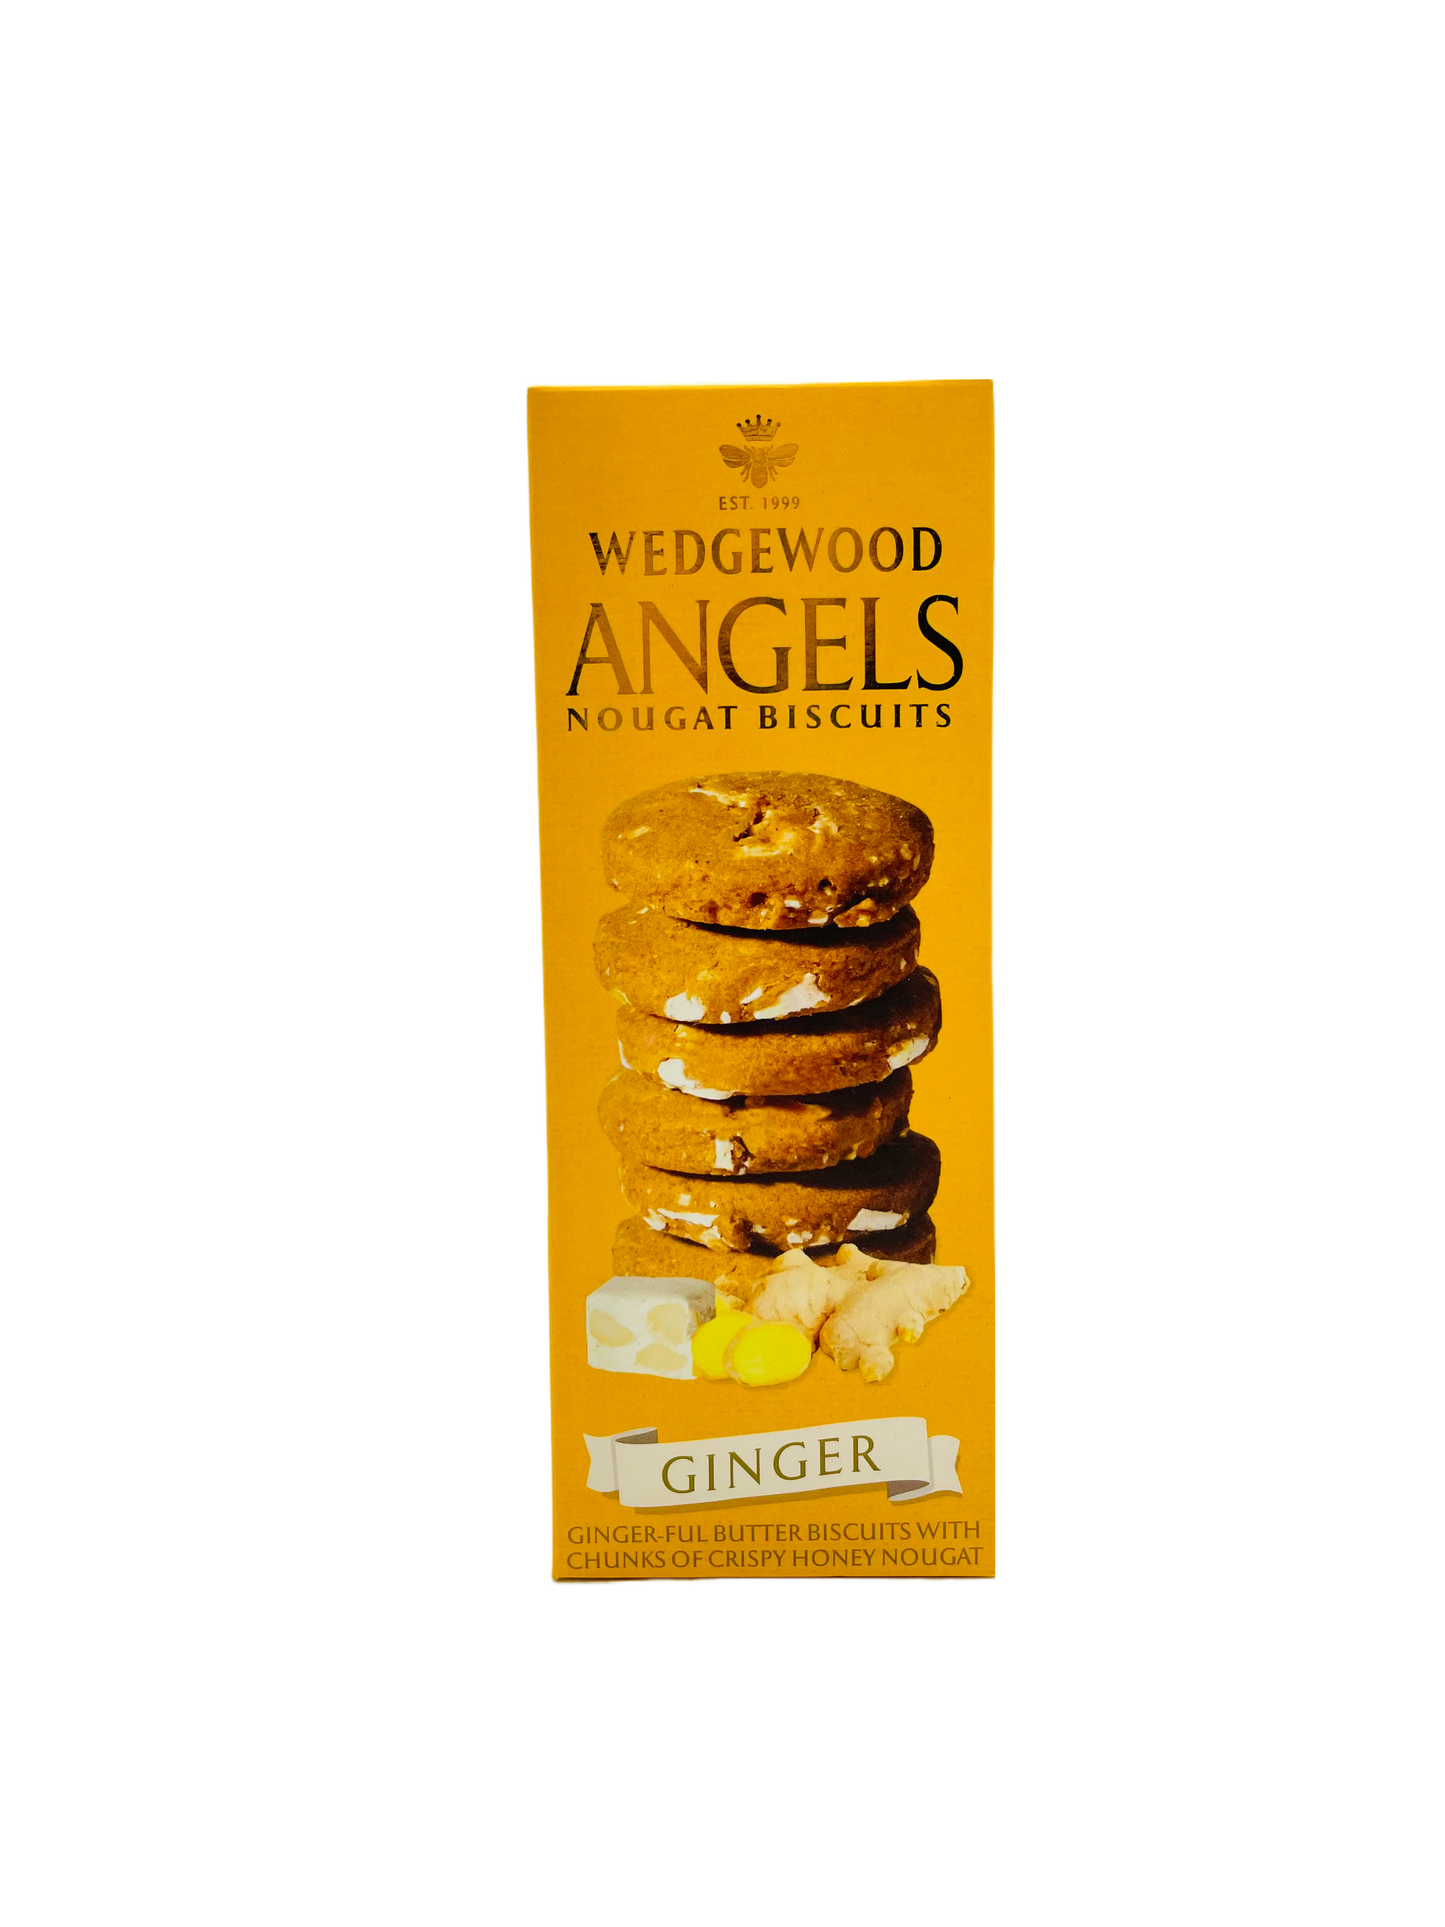 Wedgewood Angels Nougat Biscuits Ginger Flavoured 150g